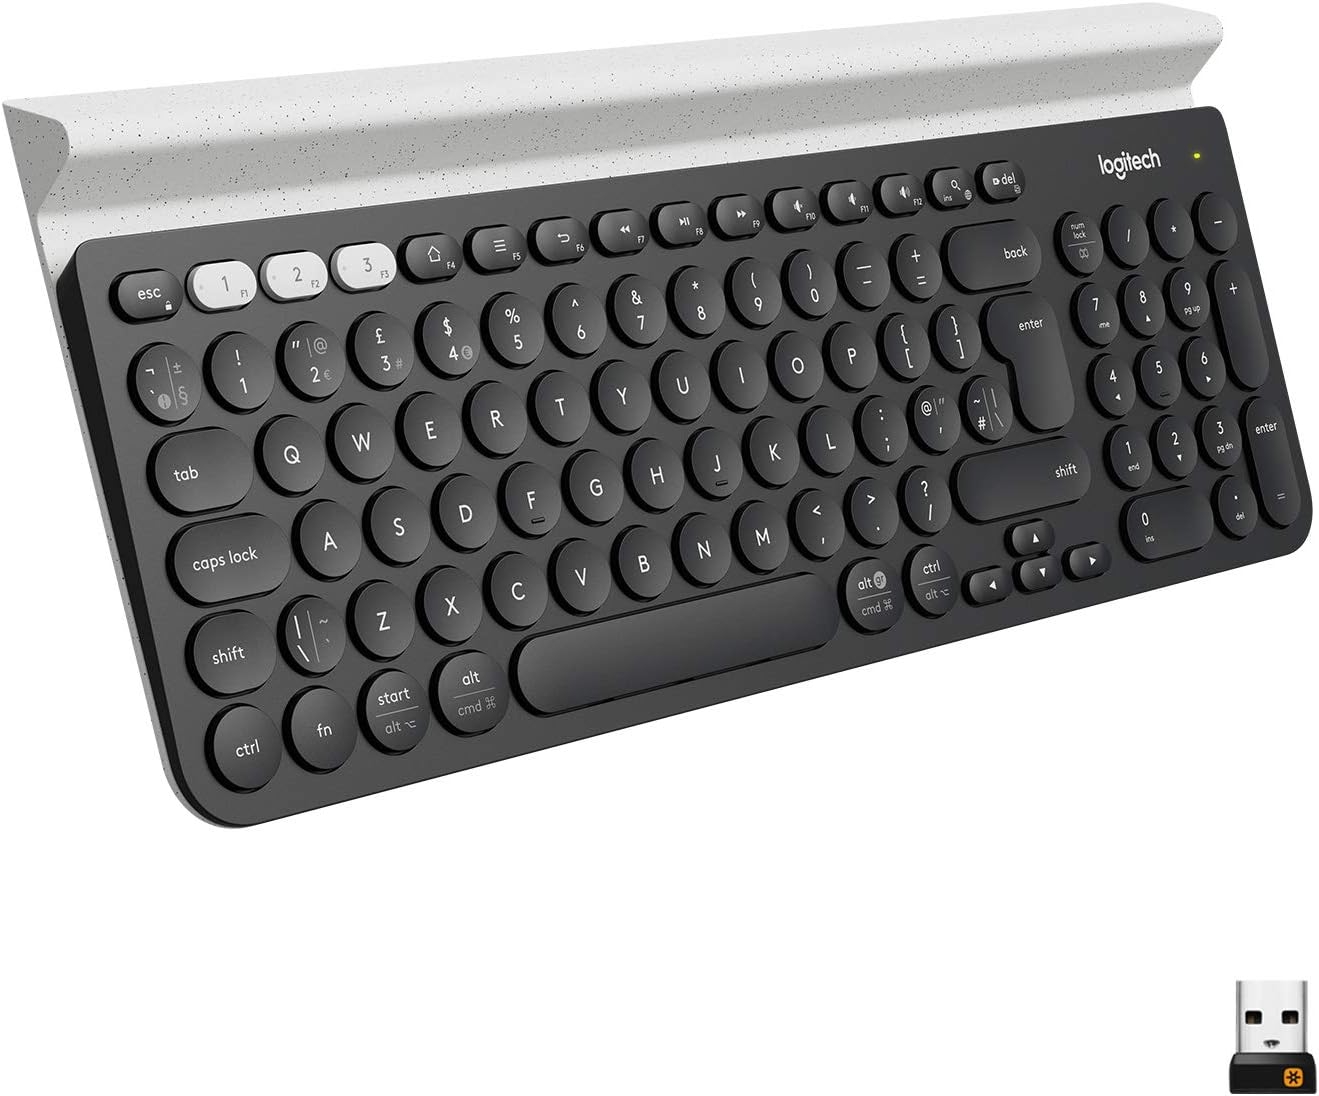 Logitech K780 Multi-Device Wireless Keyboard for Computer, Phone and Tablet – FLOW Cross-Computer Control Compatible